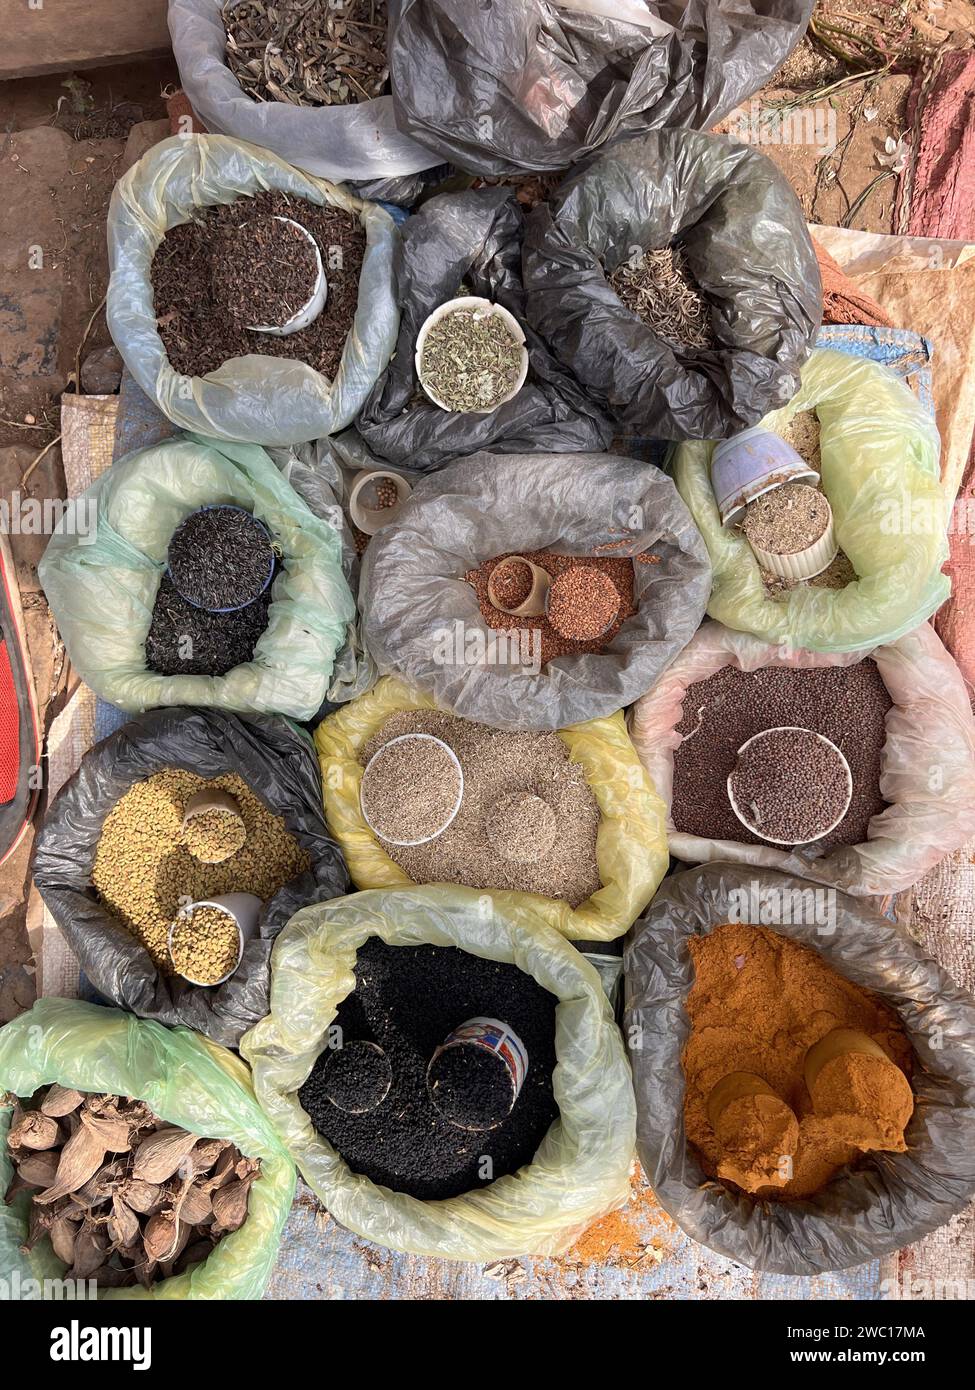 bulk spice in plastic bags at a market in Ethiopia. Stock Photo